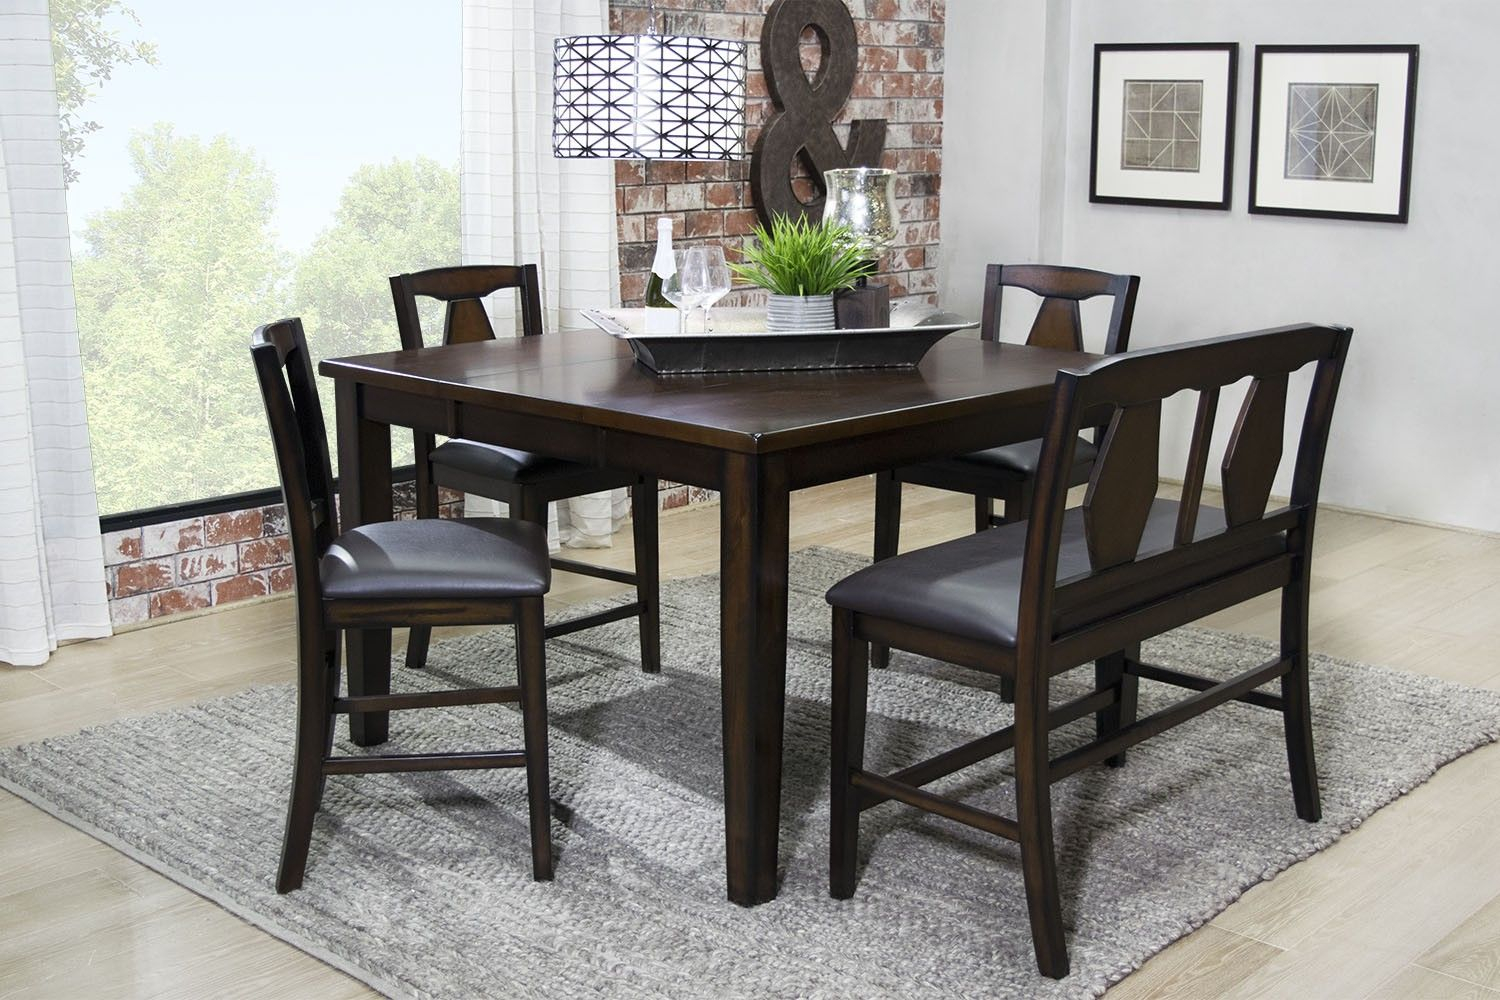 Mor Furniture For Less The Napa Dining Room Mor Furniture within dimensions 1500 X 1000